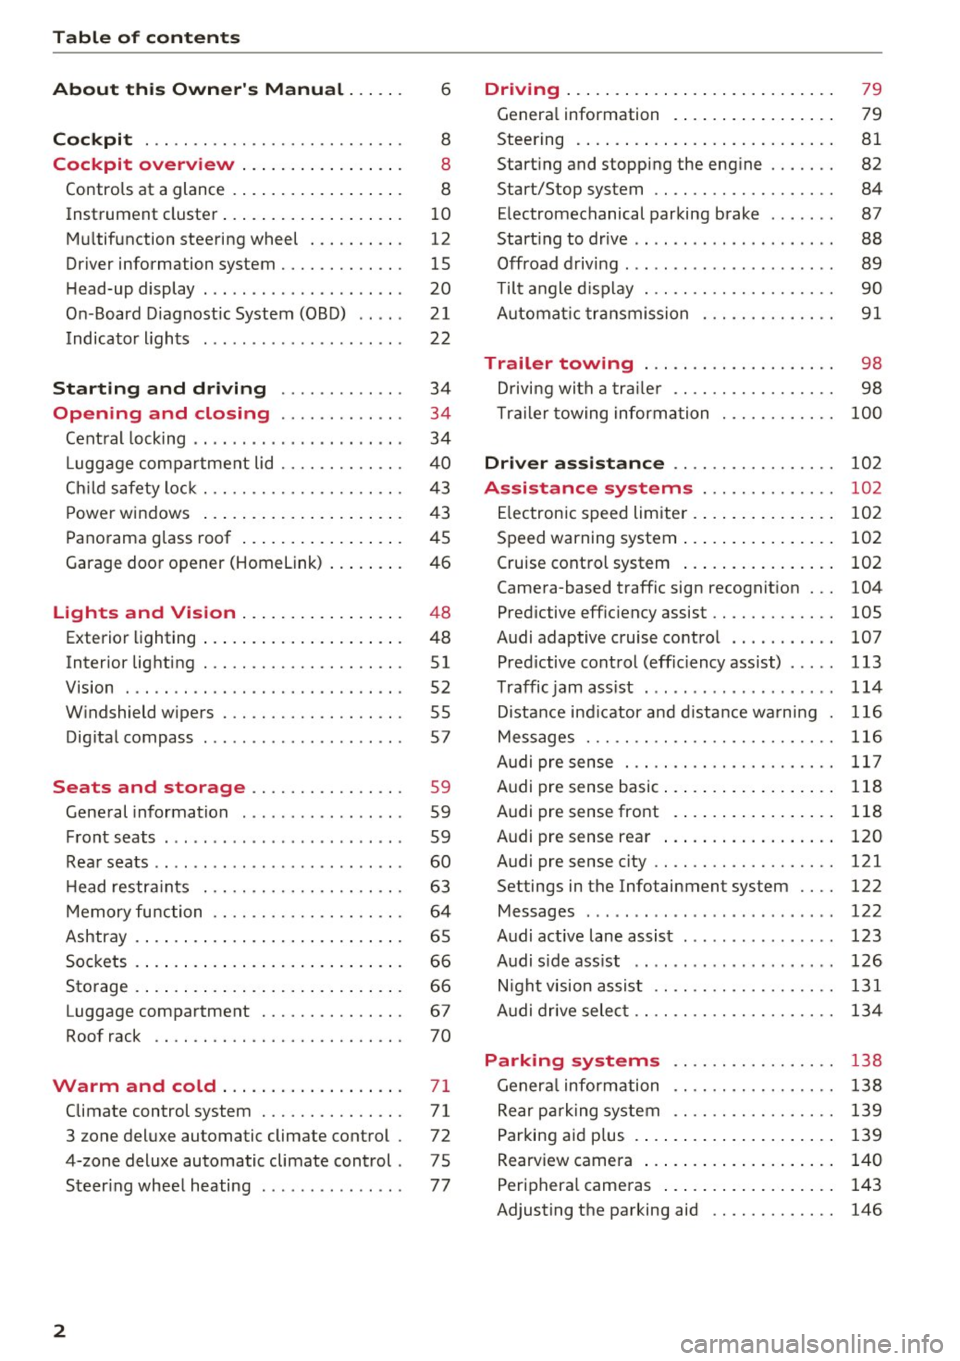 AUDI Q7 2017  Owner´s Manual Table  of  contents 
About  this  Owners  Manual  ... .. . 
Cockpit  ... .. ............... .... ..  . 
Cockpit  overview  ................ . 
Controls  at  a glance  ... .......... .. .. . 
Instrume